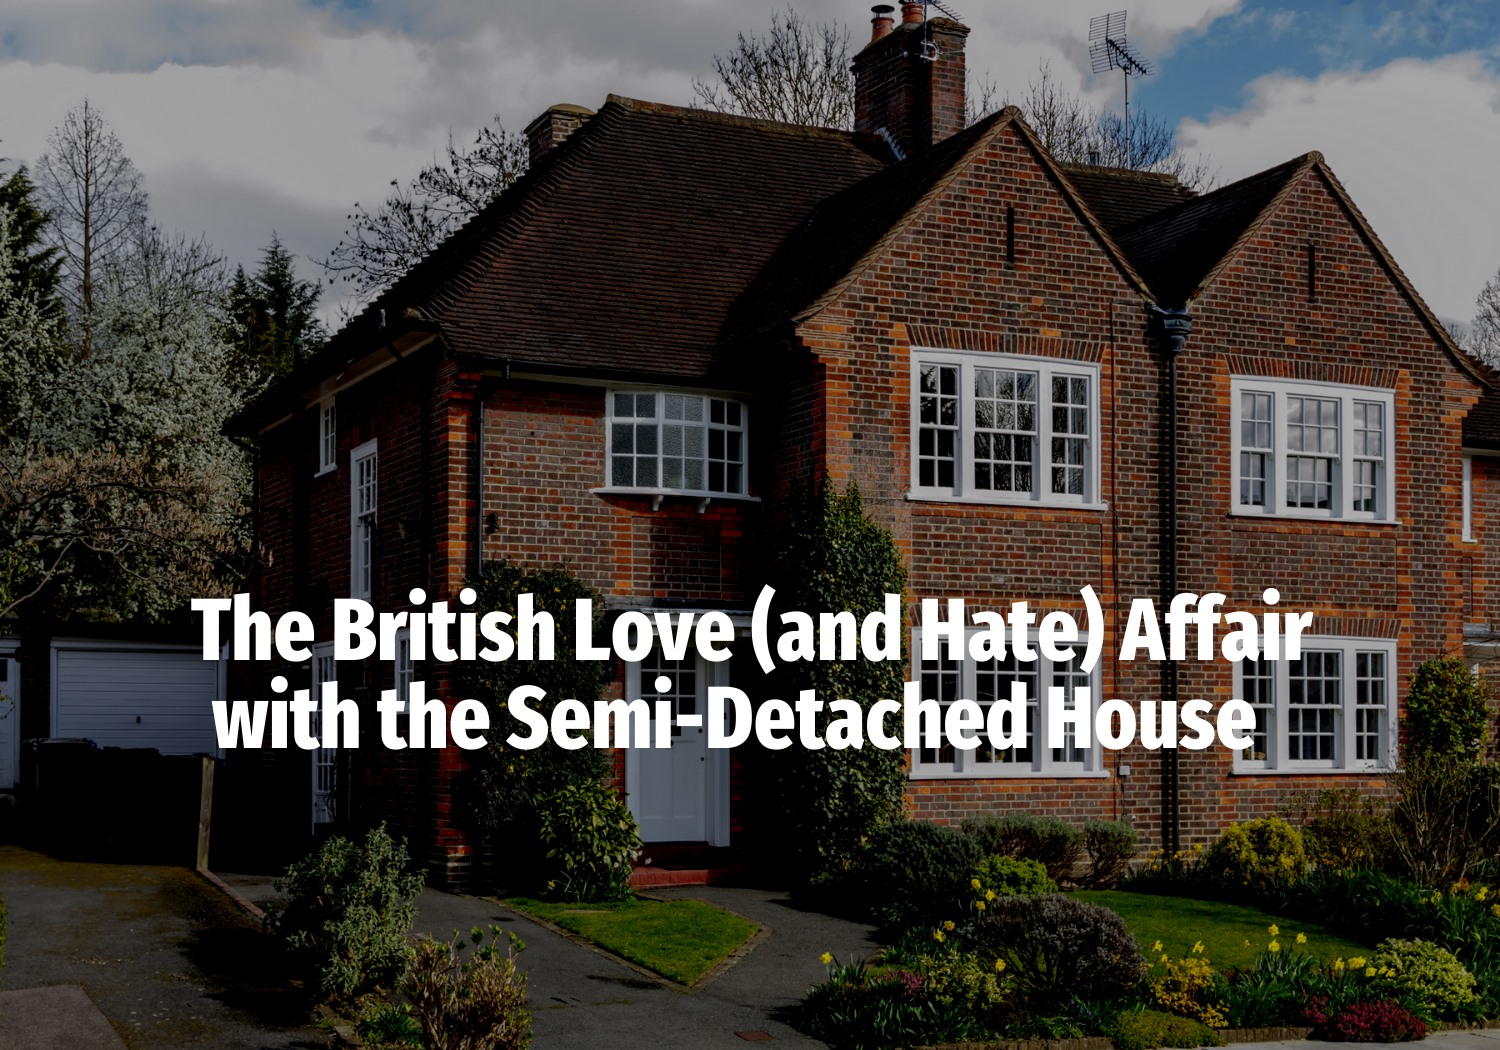 ISLEWORTH’S LOVE (AND HATE) AFFAIR WITH THE SEMI-DETACHED HOUSE